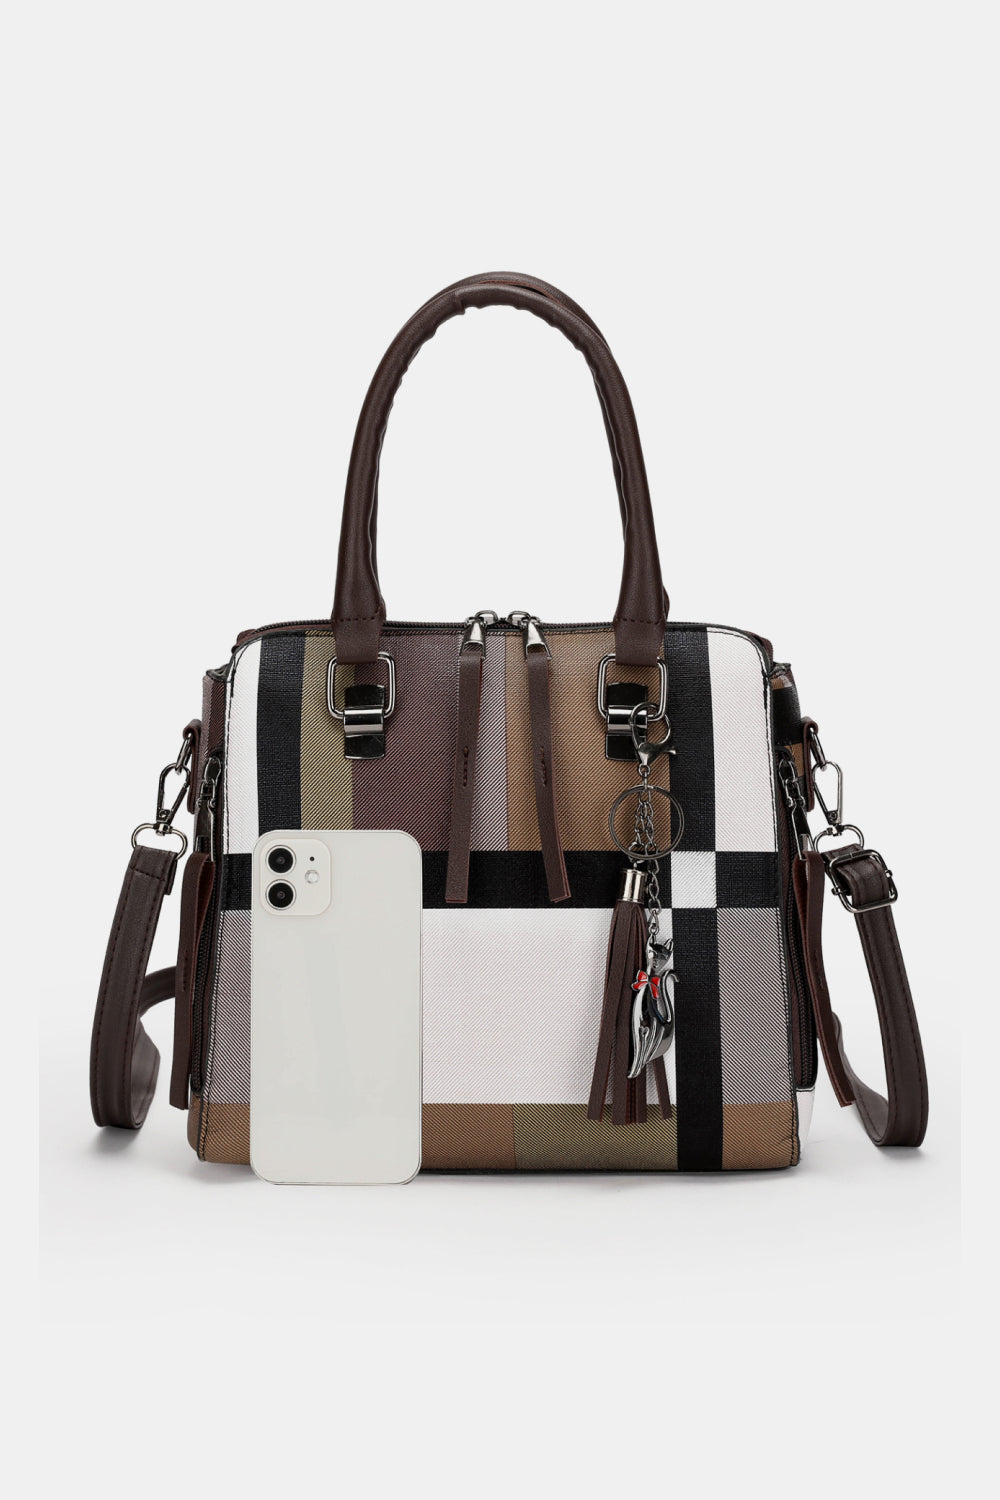 FREE GIFT WITH $150 PURCHASE Hutton Leather Bag 4-Piece Set